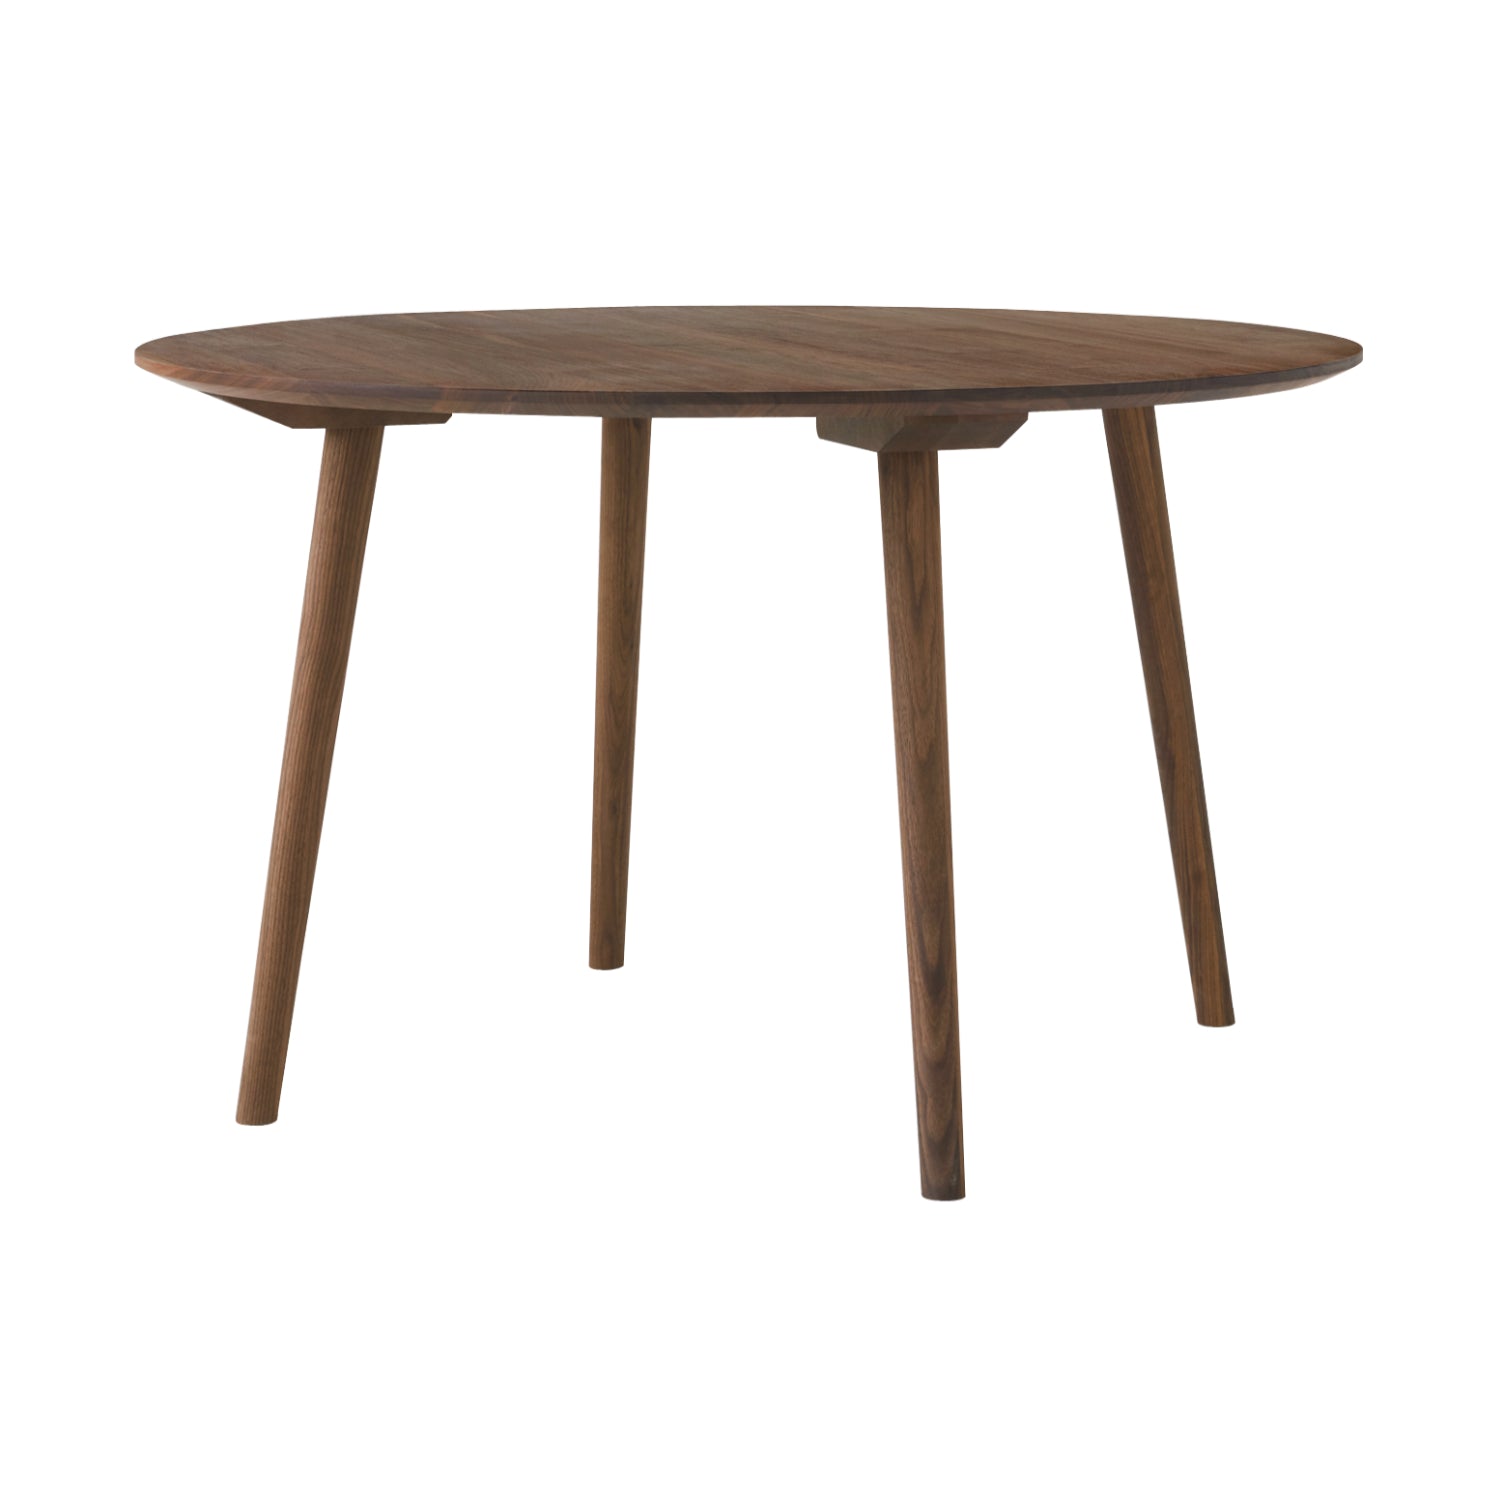 In Between Round Dining Table SK3 + SK4: Large (SK4) - 47.2